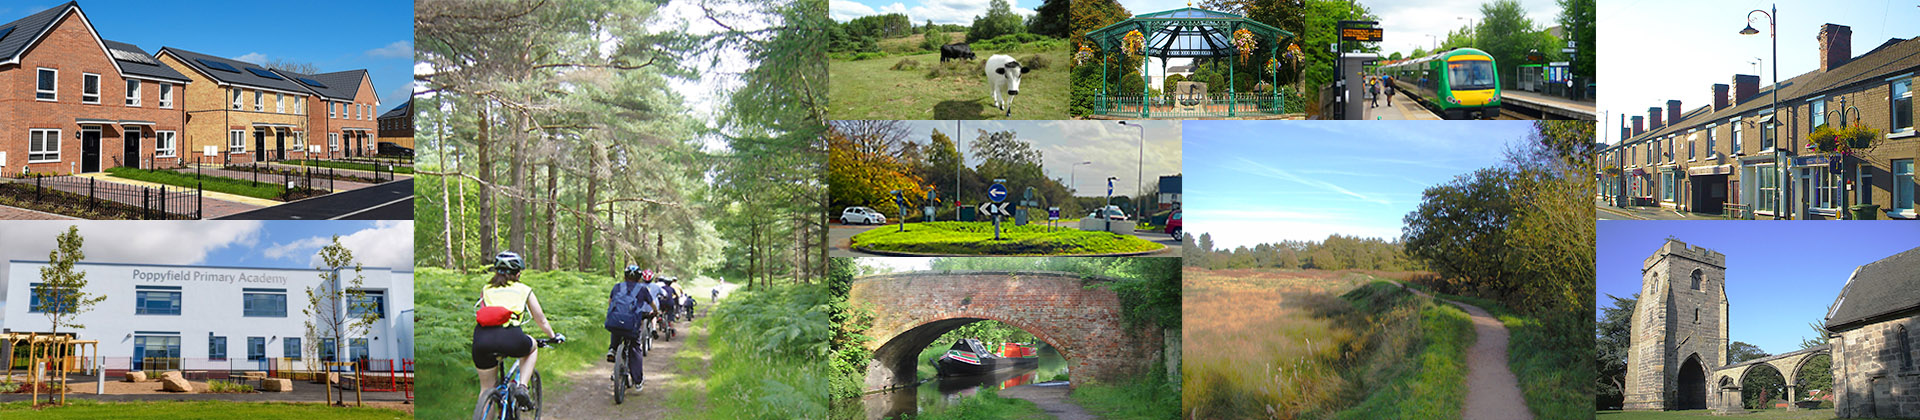 montage of cannock chase district scenes